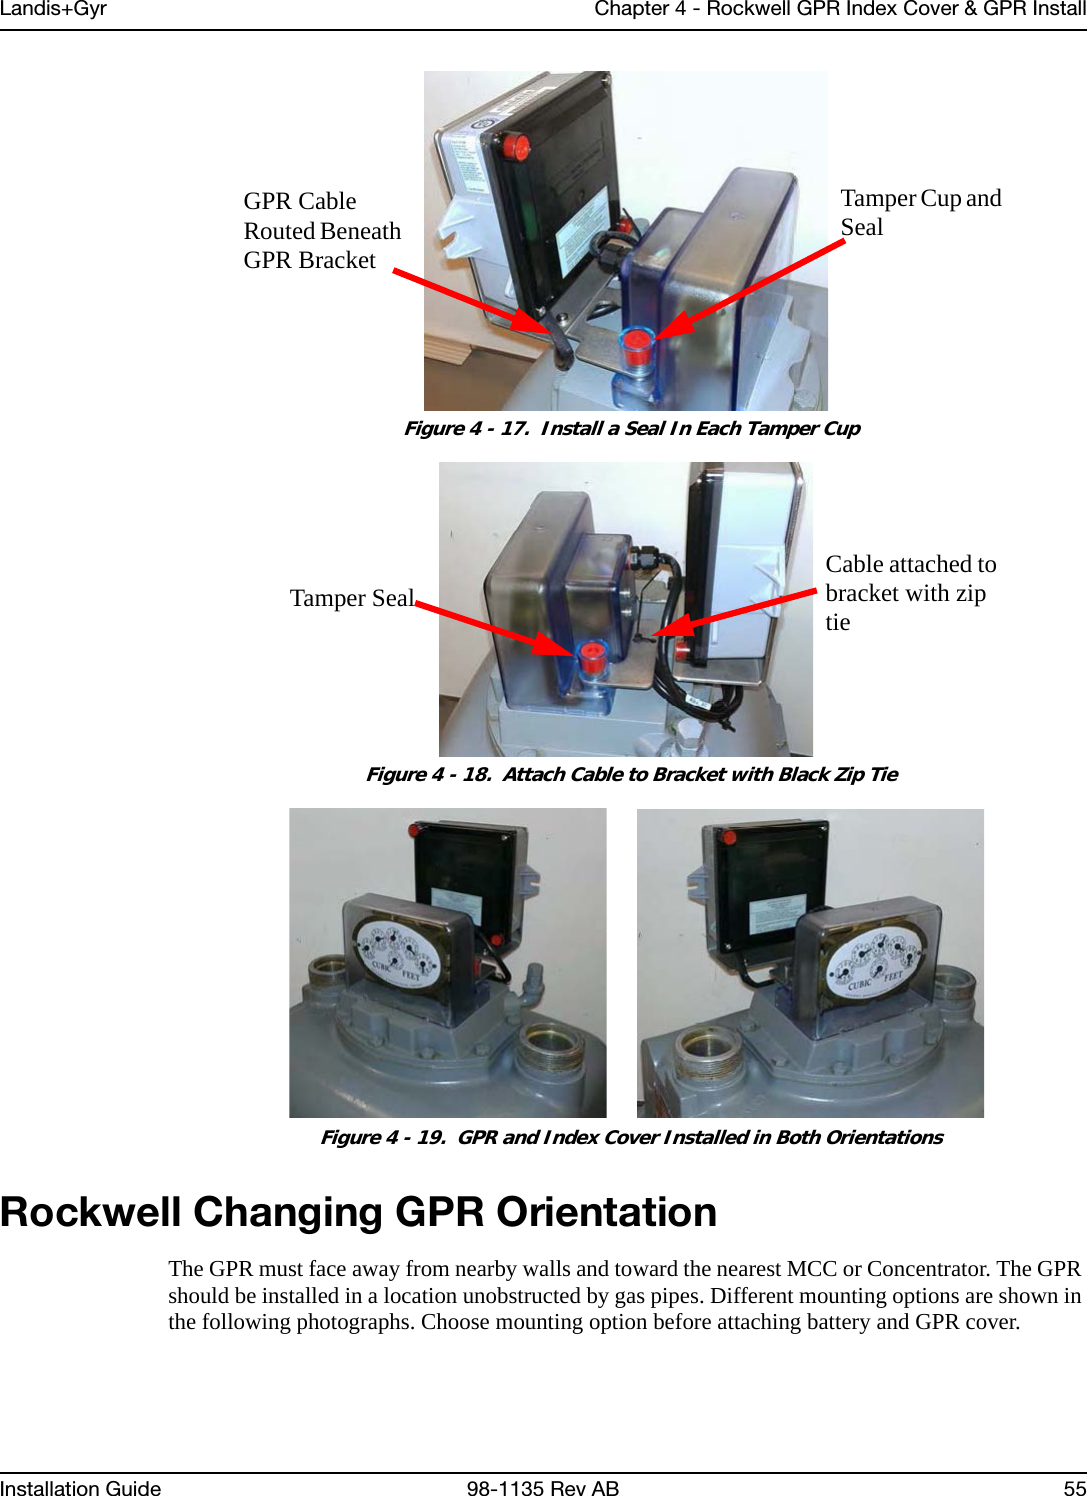 Landis+Gyr Chapter 4 - Rockwell GPR Index Cover &amp; GPR InstallInstallation Guide 98-1135 Rev AB 55 Figure 4 - 17.  Install a Seal In Each Tamper Cup Figure 4 - 18.  Attach Cable to Bracket with Black Zip Tie Figure 4 - 19.  GPR and Index Cover Installed in Both OrientationsRockwell Changing GPR OrientationThe GPR must face away from nearby walls and toward the nearest MCC or Concentrator. The GPR should be installed in a location unobstructed by gas pipes. Different mounting options are shown in the following photographs. Choose mounting option before attaching battery and GPR cover.Tamper Cup and SealGPR Cable Routed Beneath GPR BracketTamper SealCable attached to bracket with zip tie